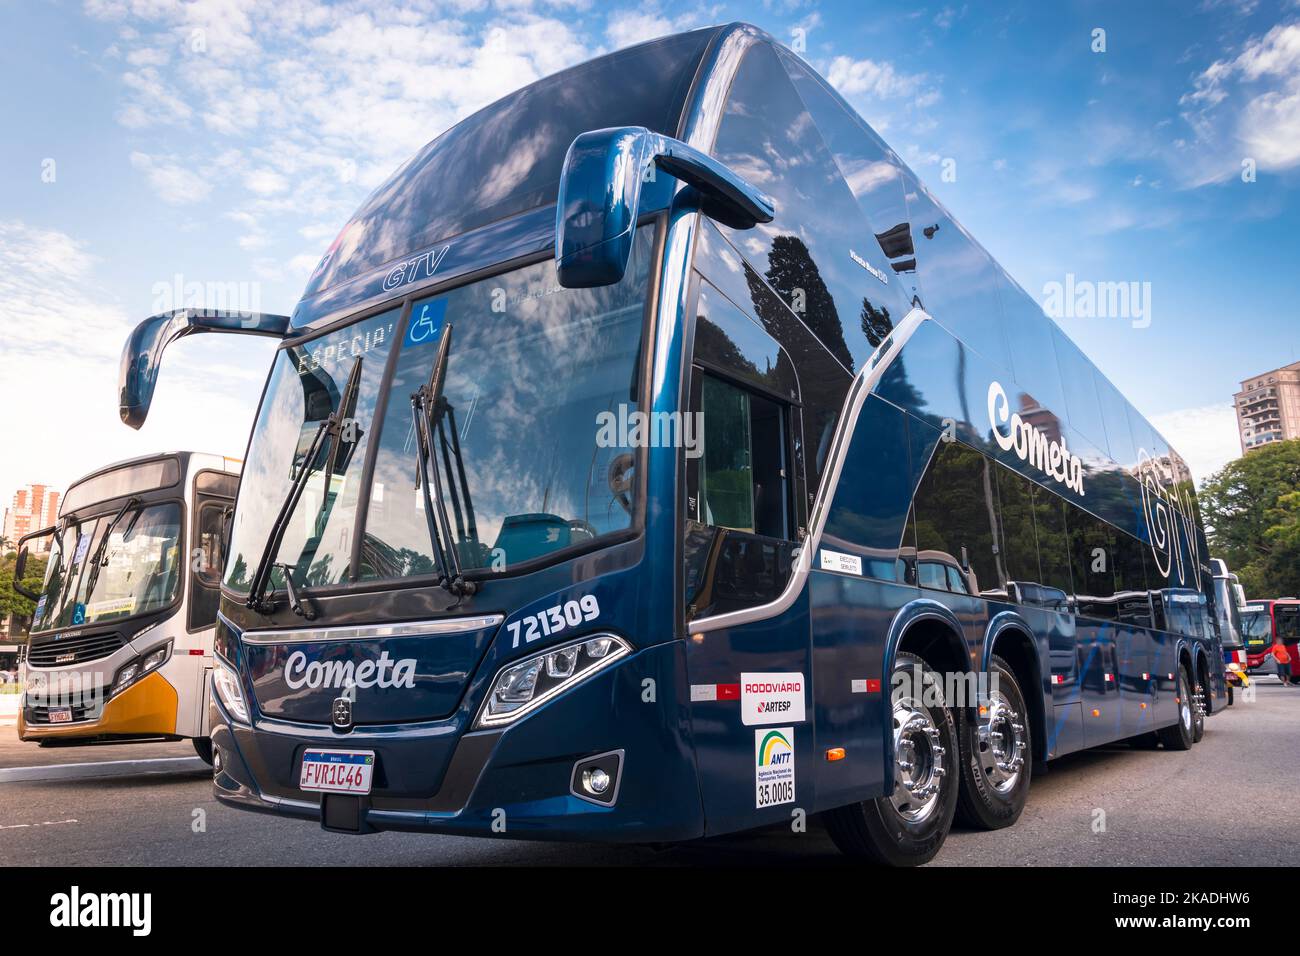 Vehicle Busscar Vissta Buss DD Scania  on display at Bus Brasil Fest (BBF 2021), held in the city of São Paulo. Stock Photo